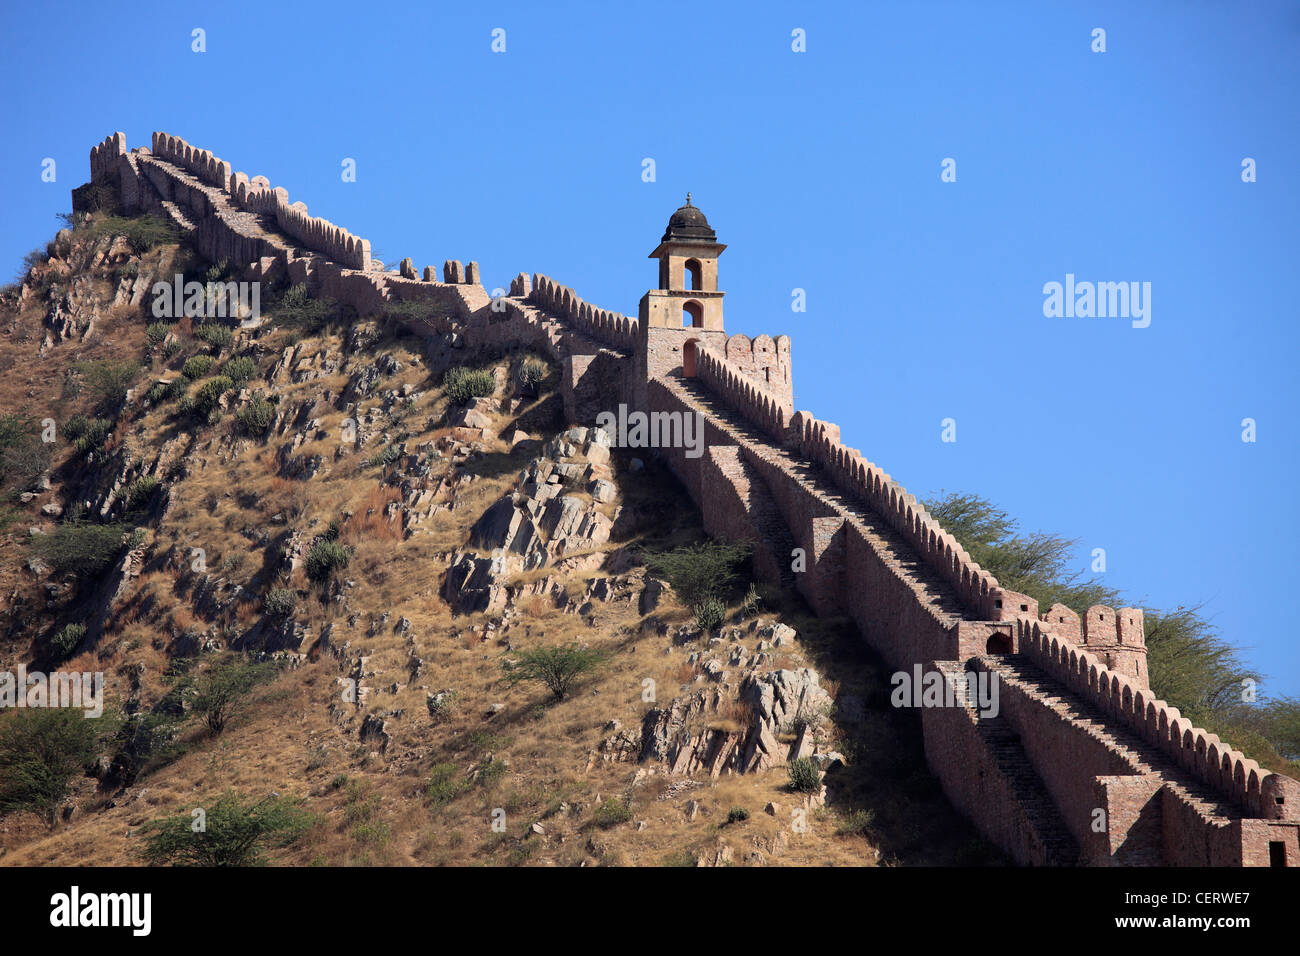 India, Rajasthan, Jaipur, Amber, fortified hilltops, scenery, Stock Photo